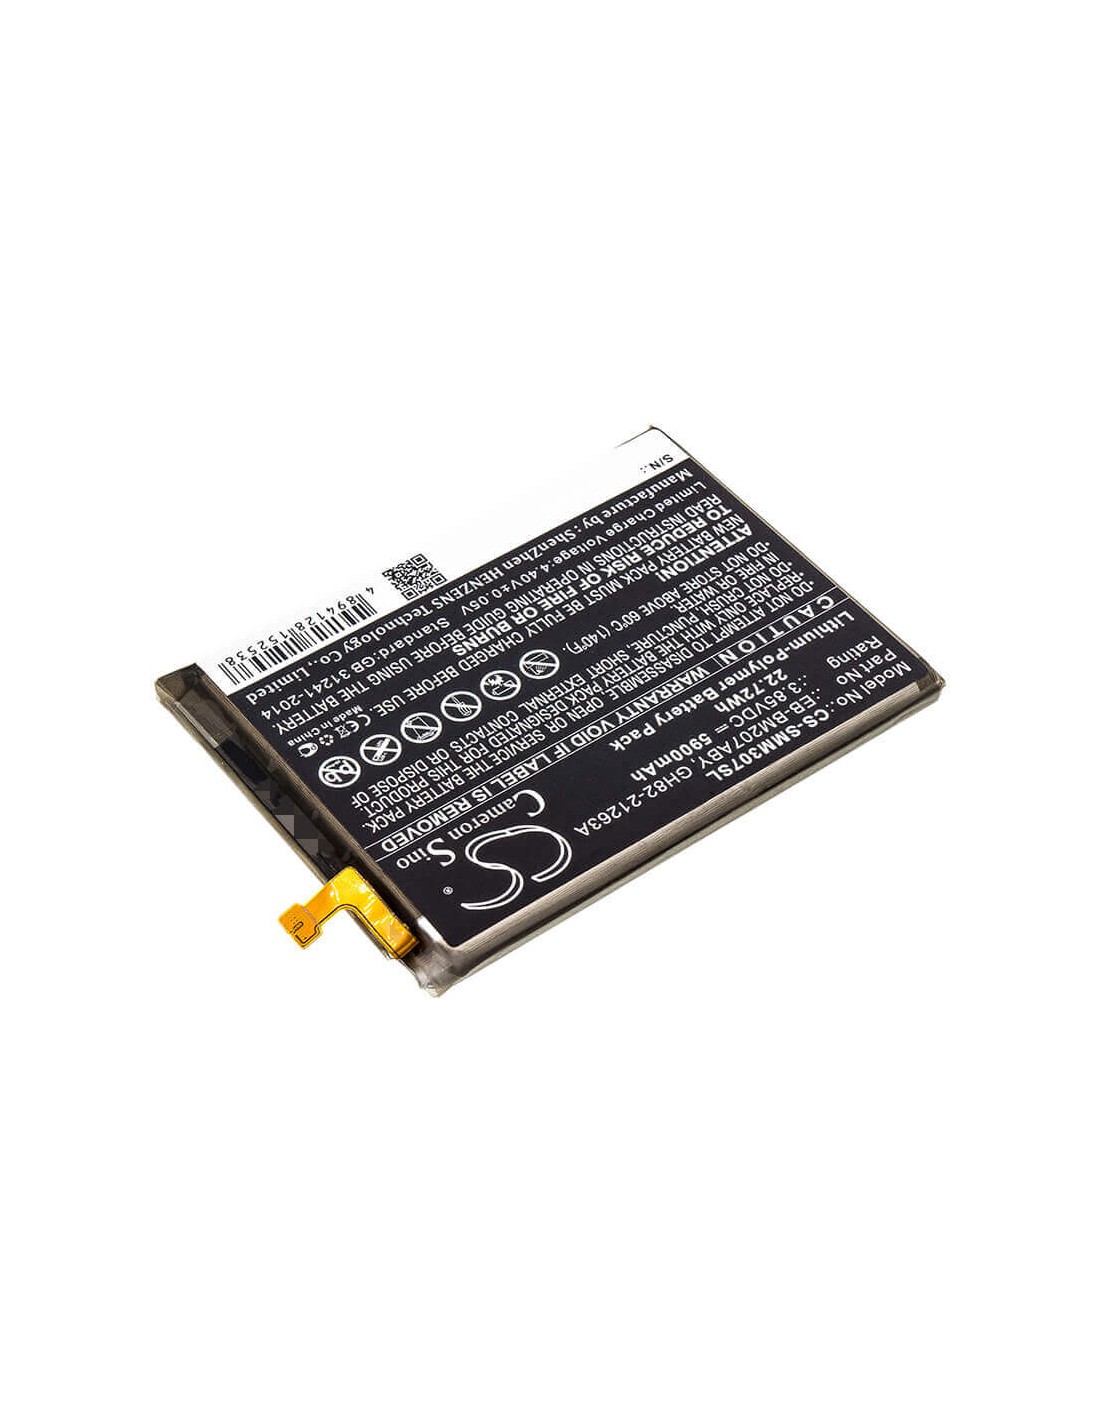 Battery for Samsung, Galaxy M30s, Sm-m307f, Sm-m307f/ds 3.85V, 5900mAh - 22.72Wh